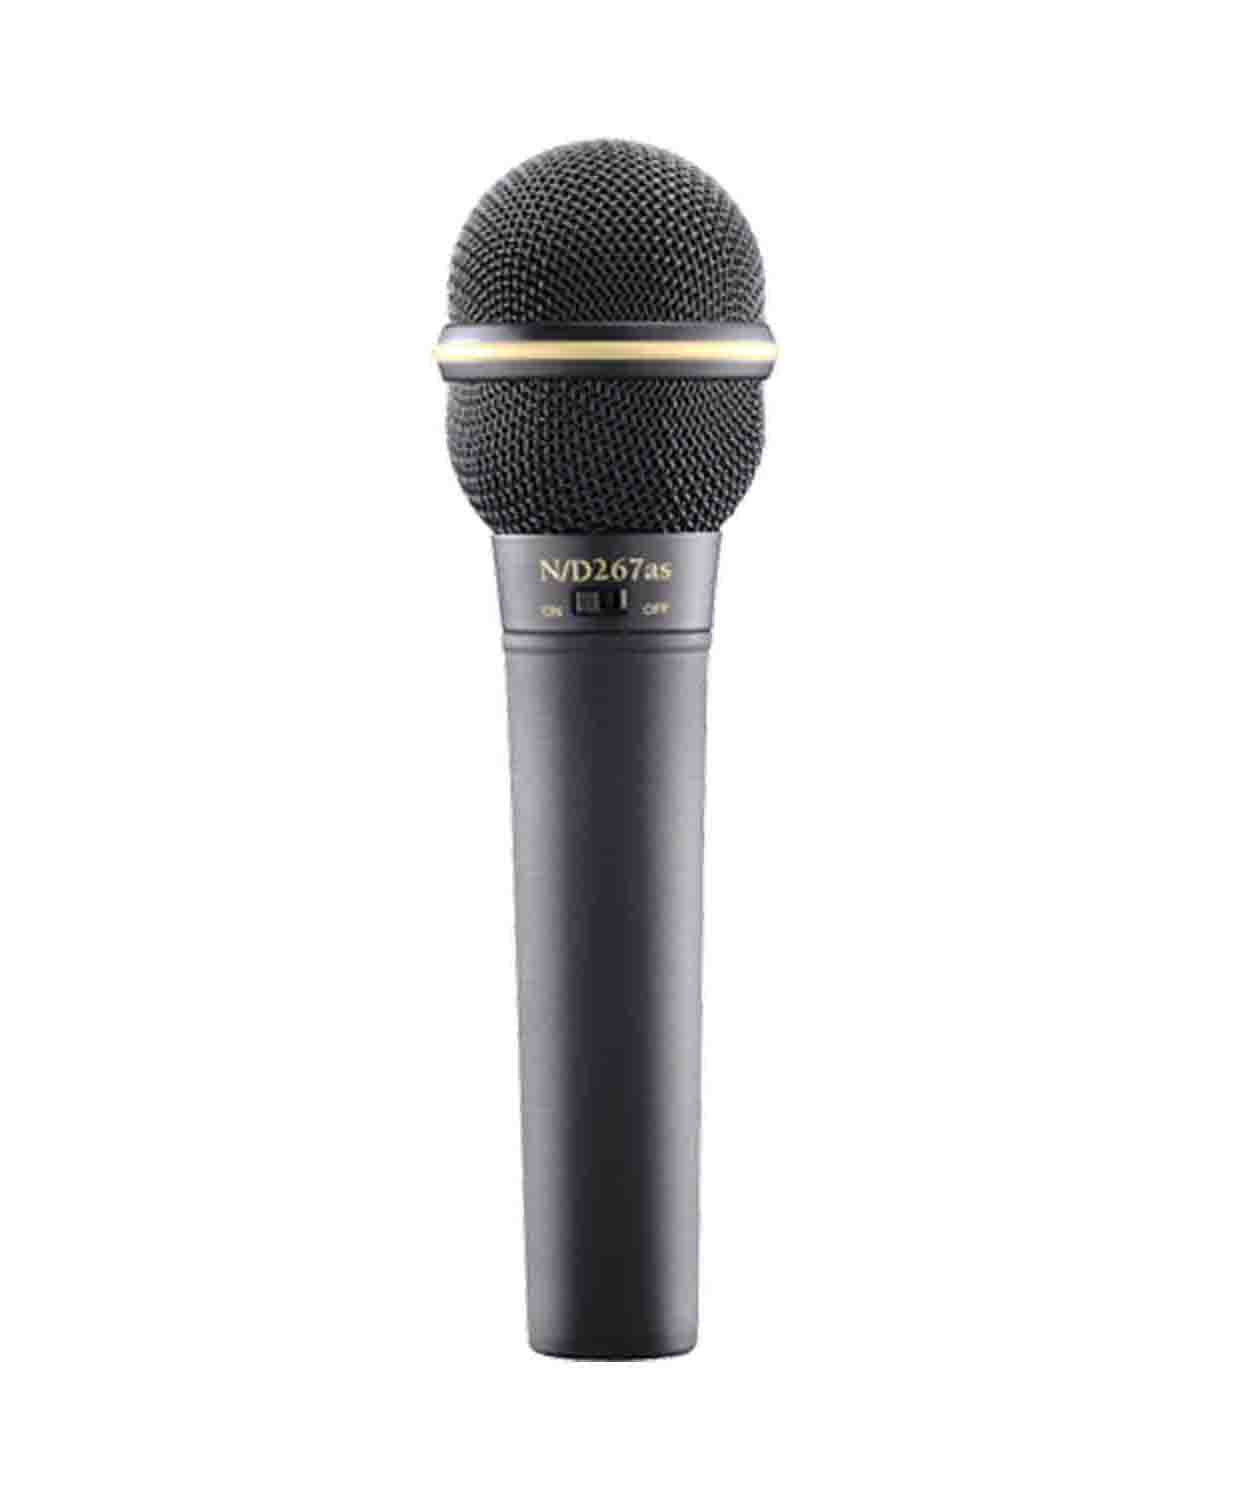 Electro-Voice N/D267as Handheld Dynamic Vocal Microphone - Hollywood DJ